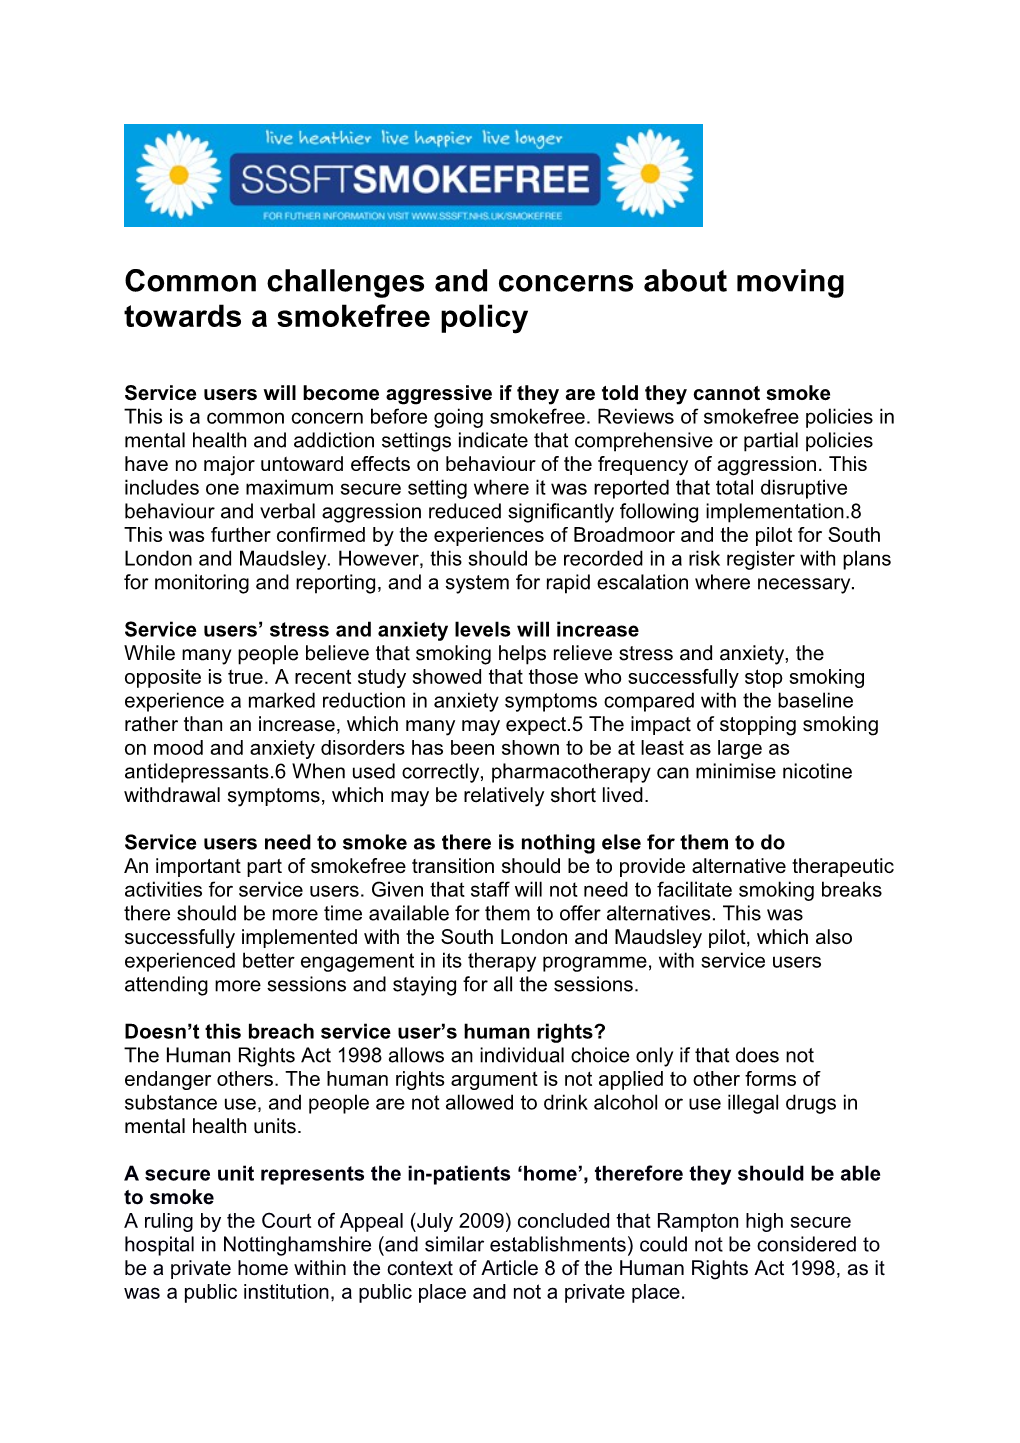 Common Challenges and Concerns About Moving Towards a Smokefree Policy